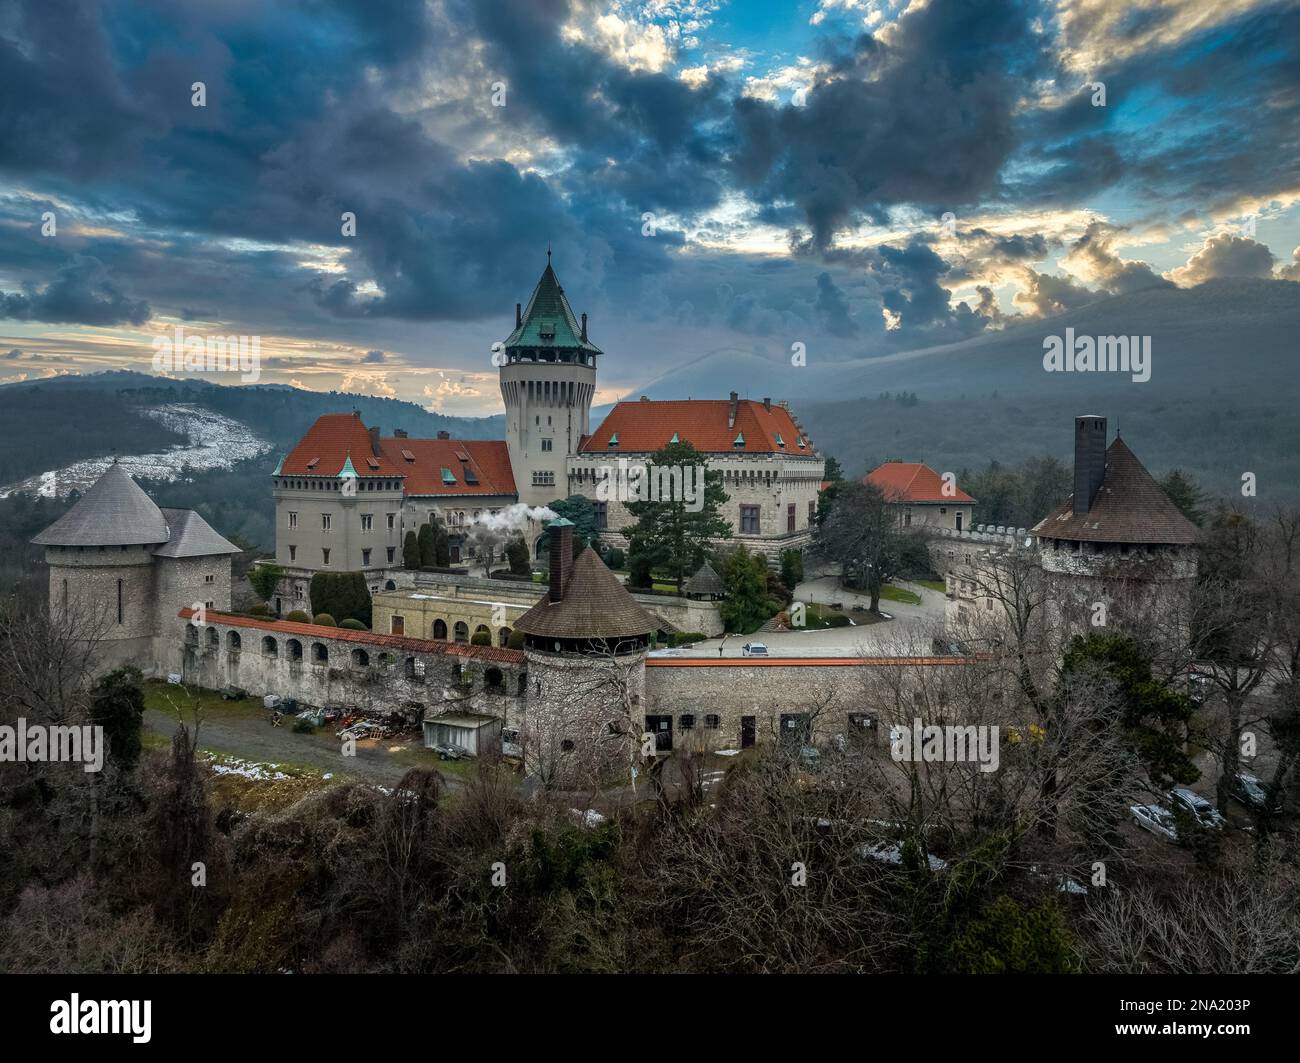 Aerial view of romantic medieval knight castle with donjon and towers in Smolenice Slovakia Stock Photo